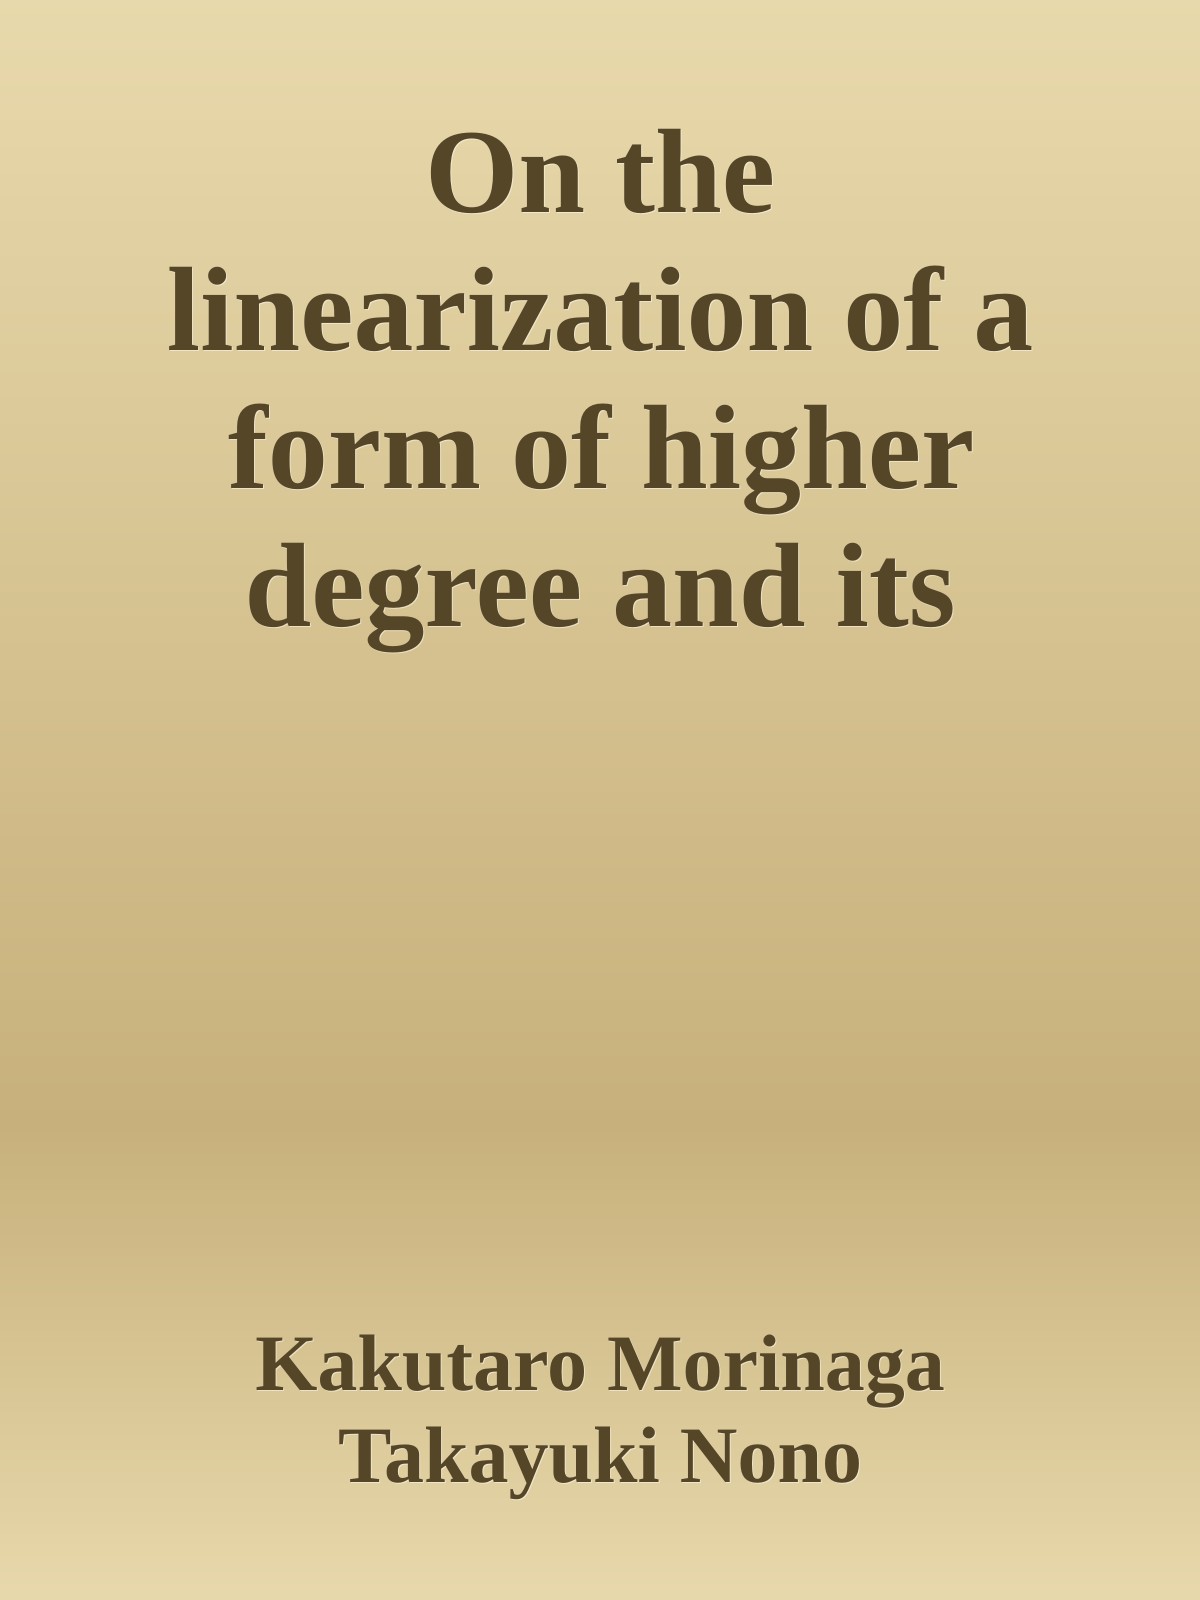 On the linearization of a form of higher degree and its representation